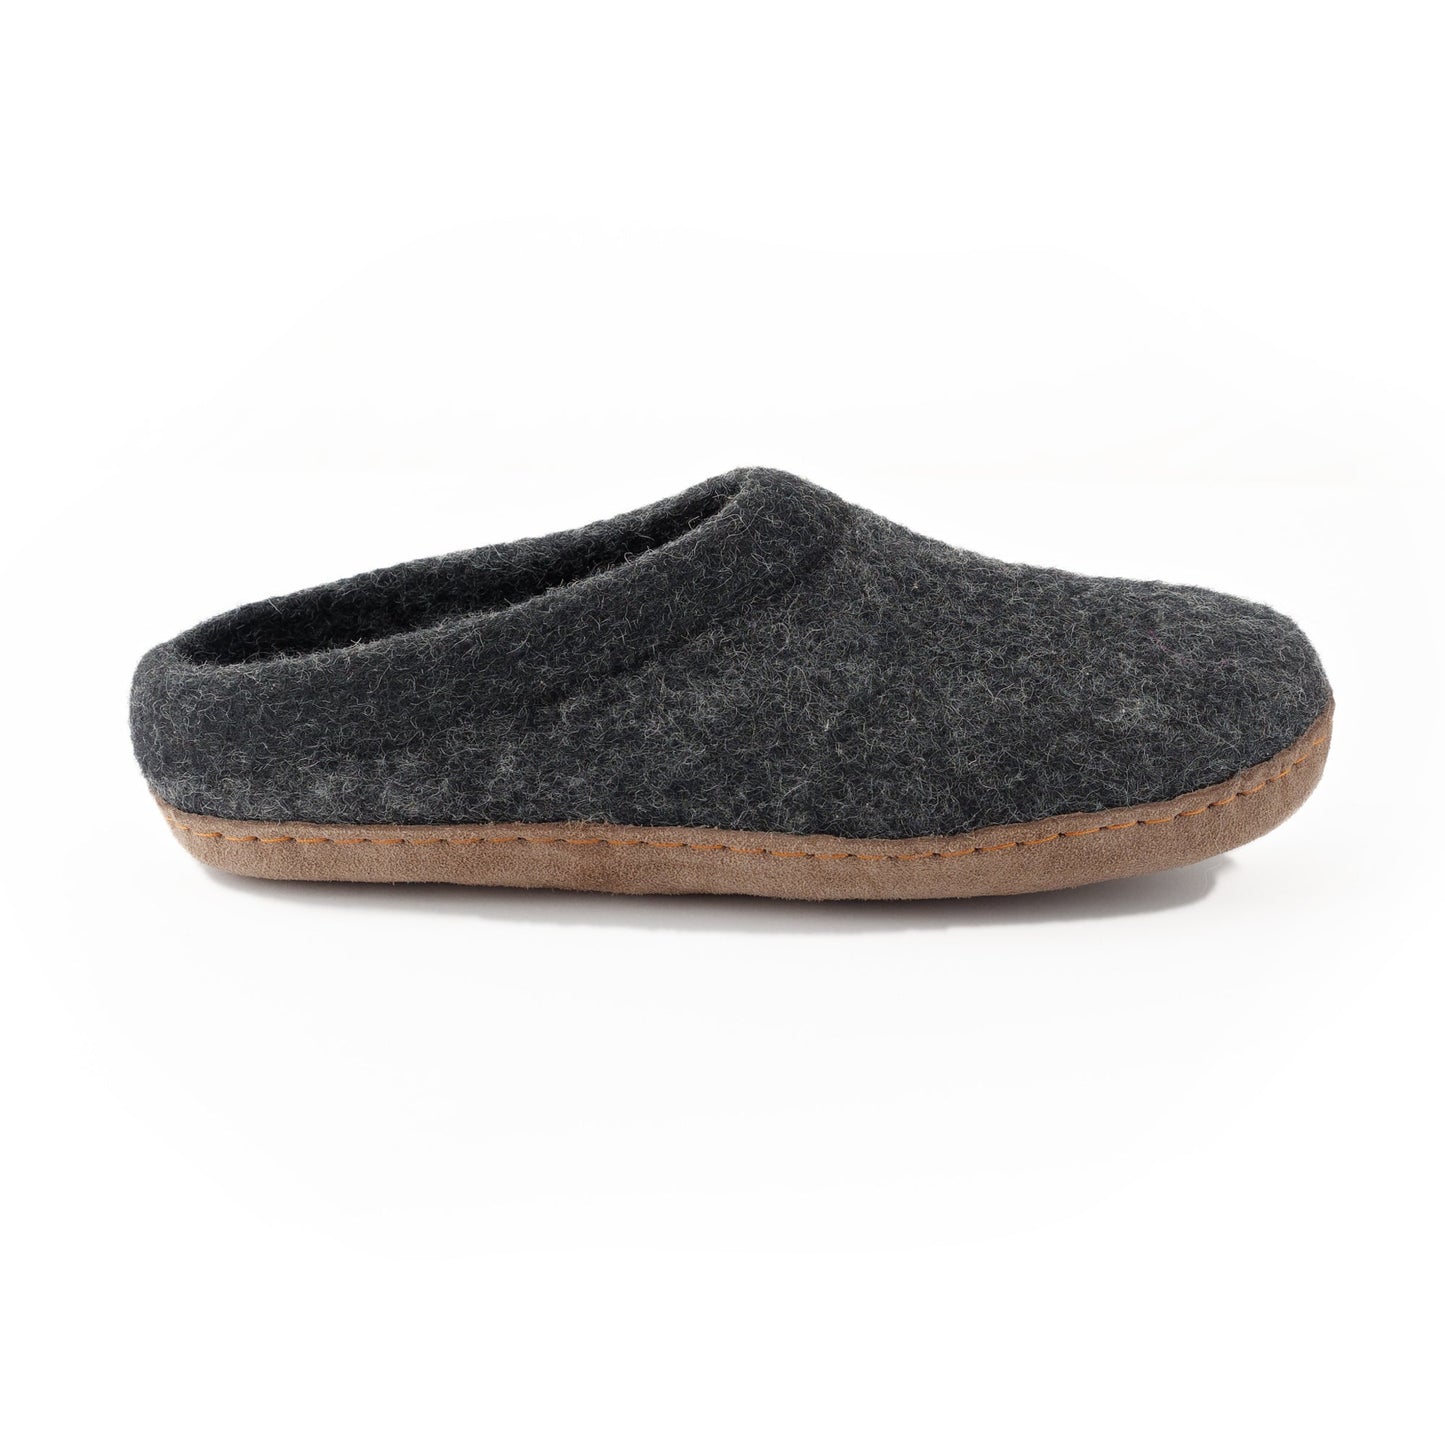 Slocan Adult Wool Slipper - Heather Charcoal